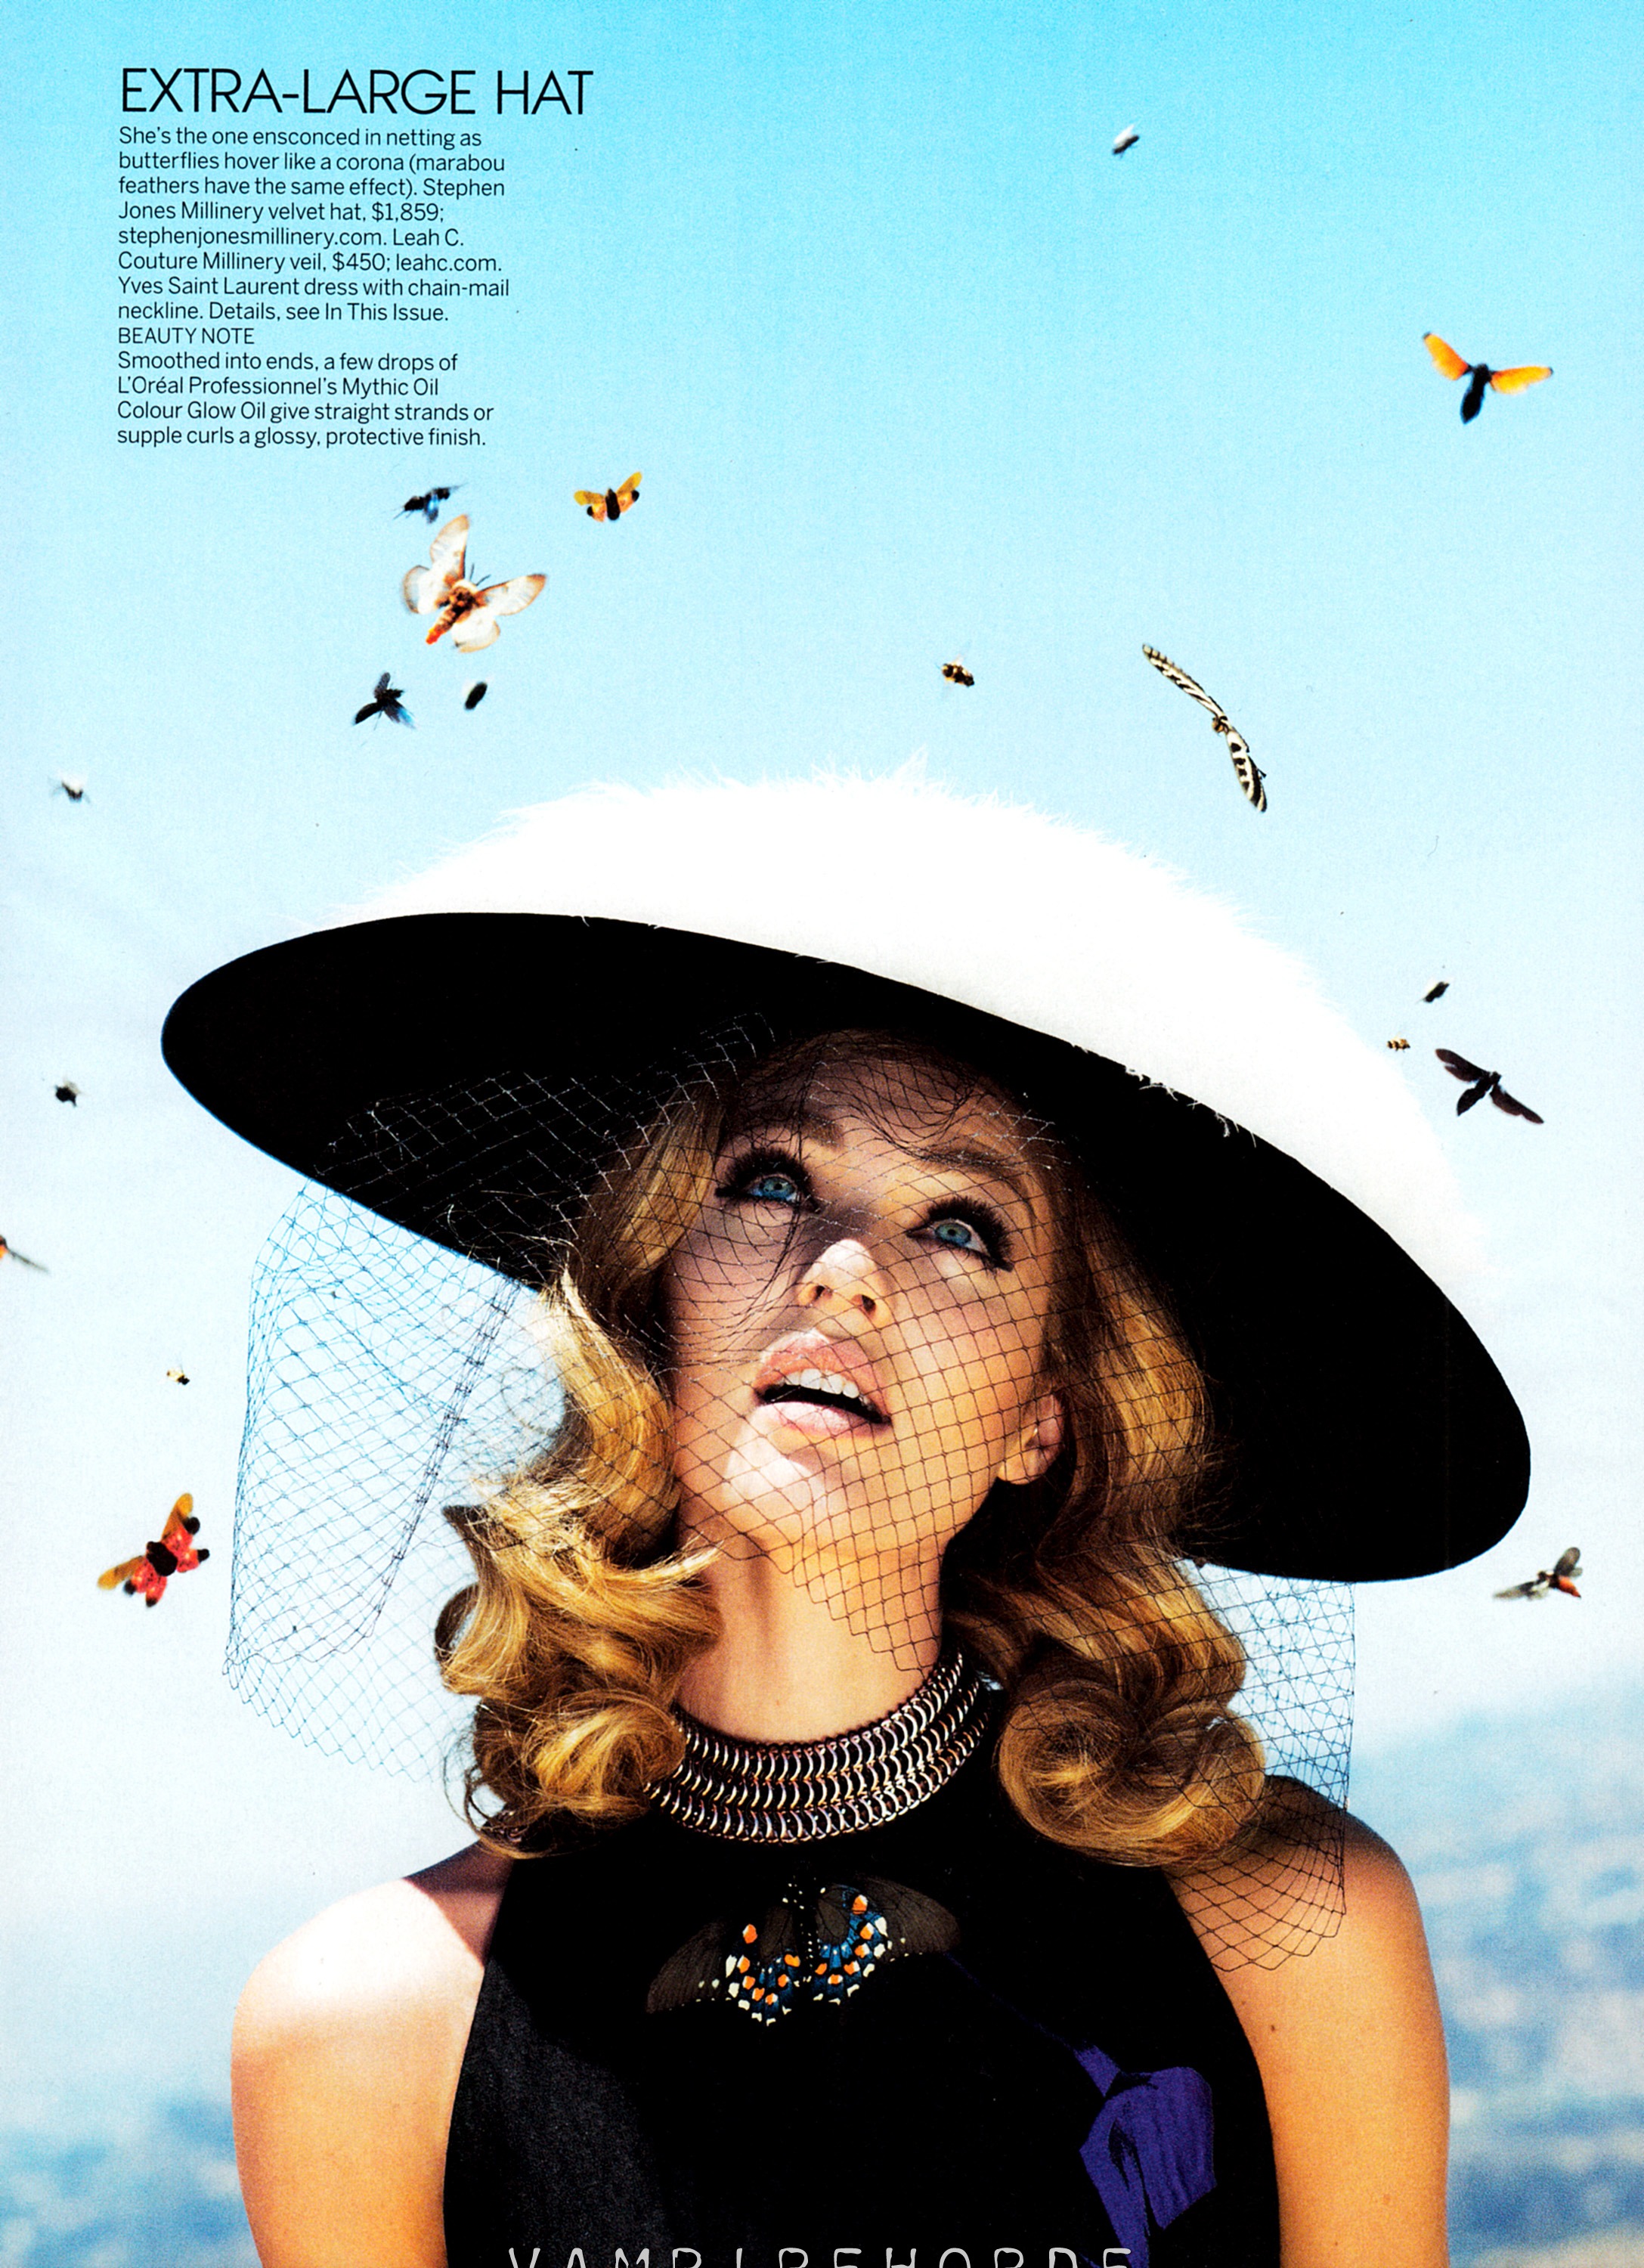 fashion_scans_remastered-candice_swanepoel-vogue_usa-october_2012-scanned_by_vampirehorde-hq-4.jpg